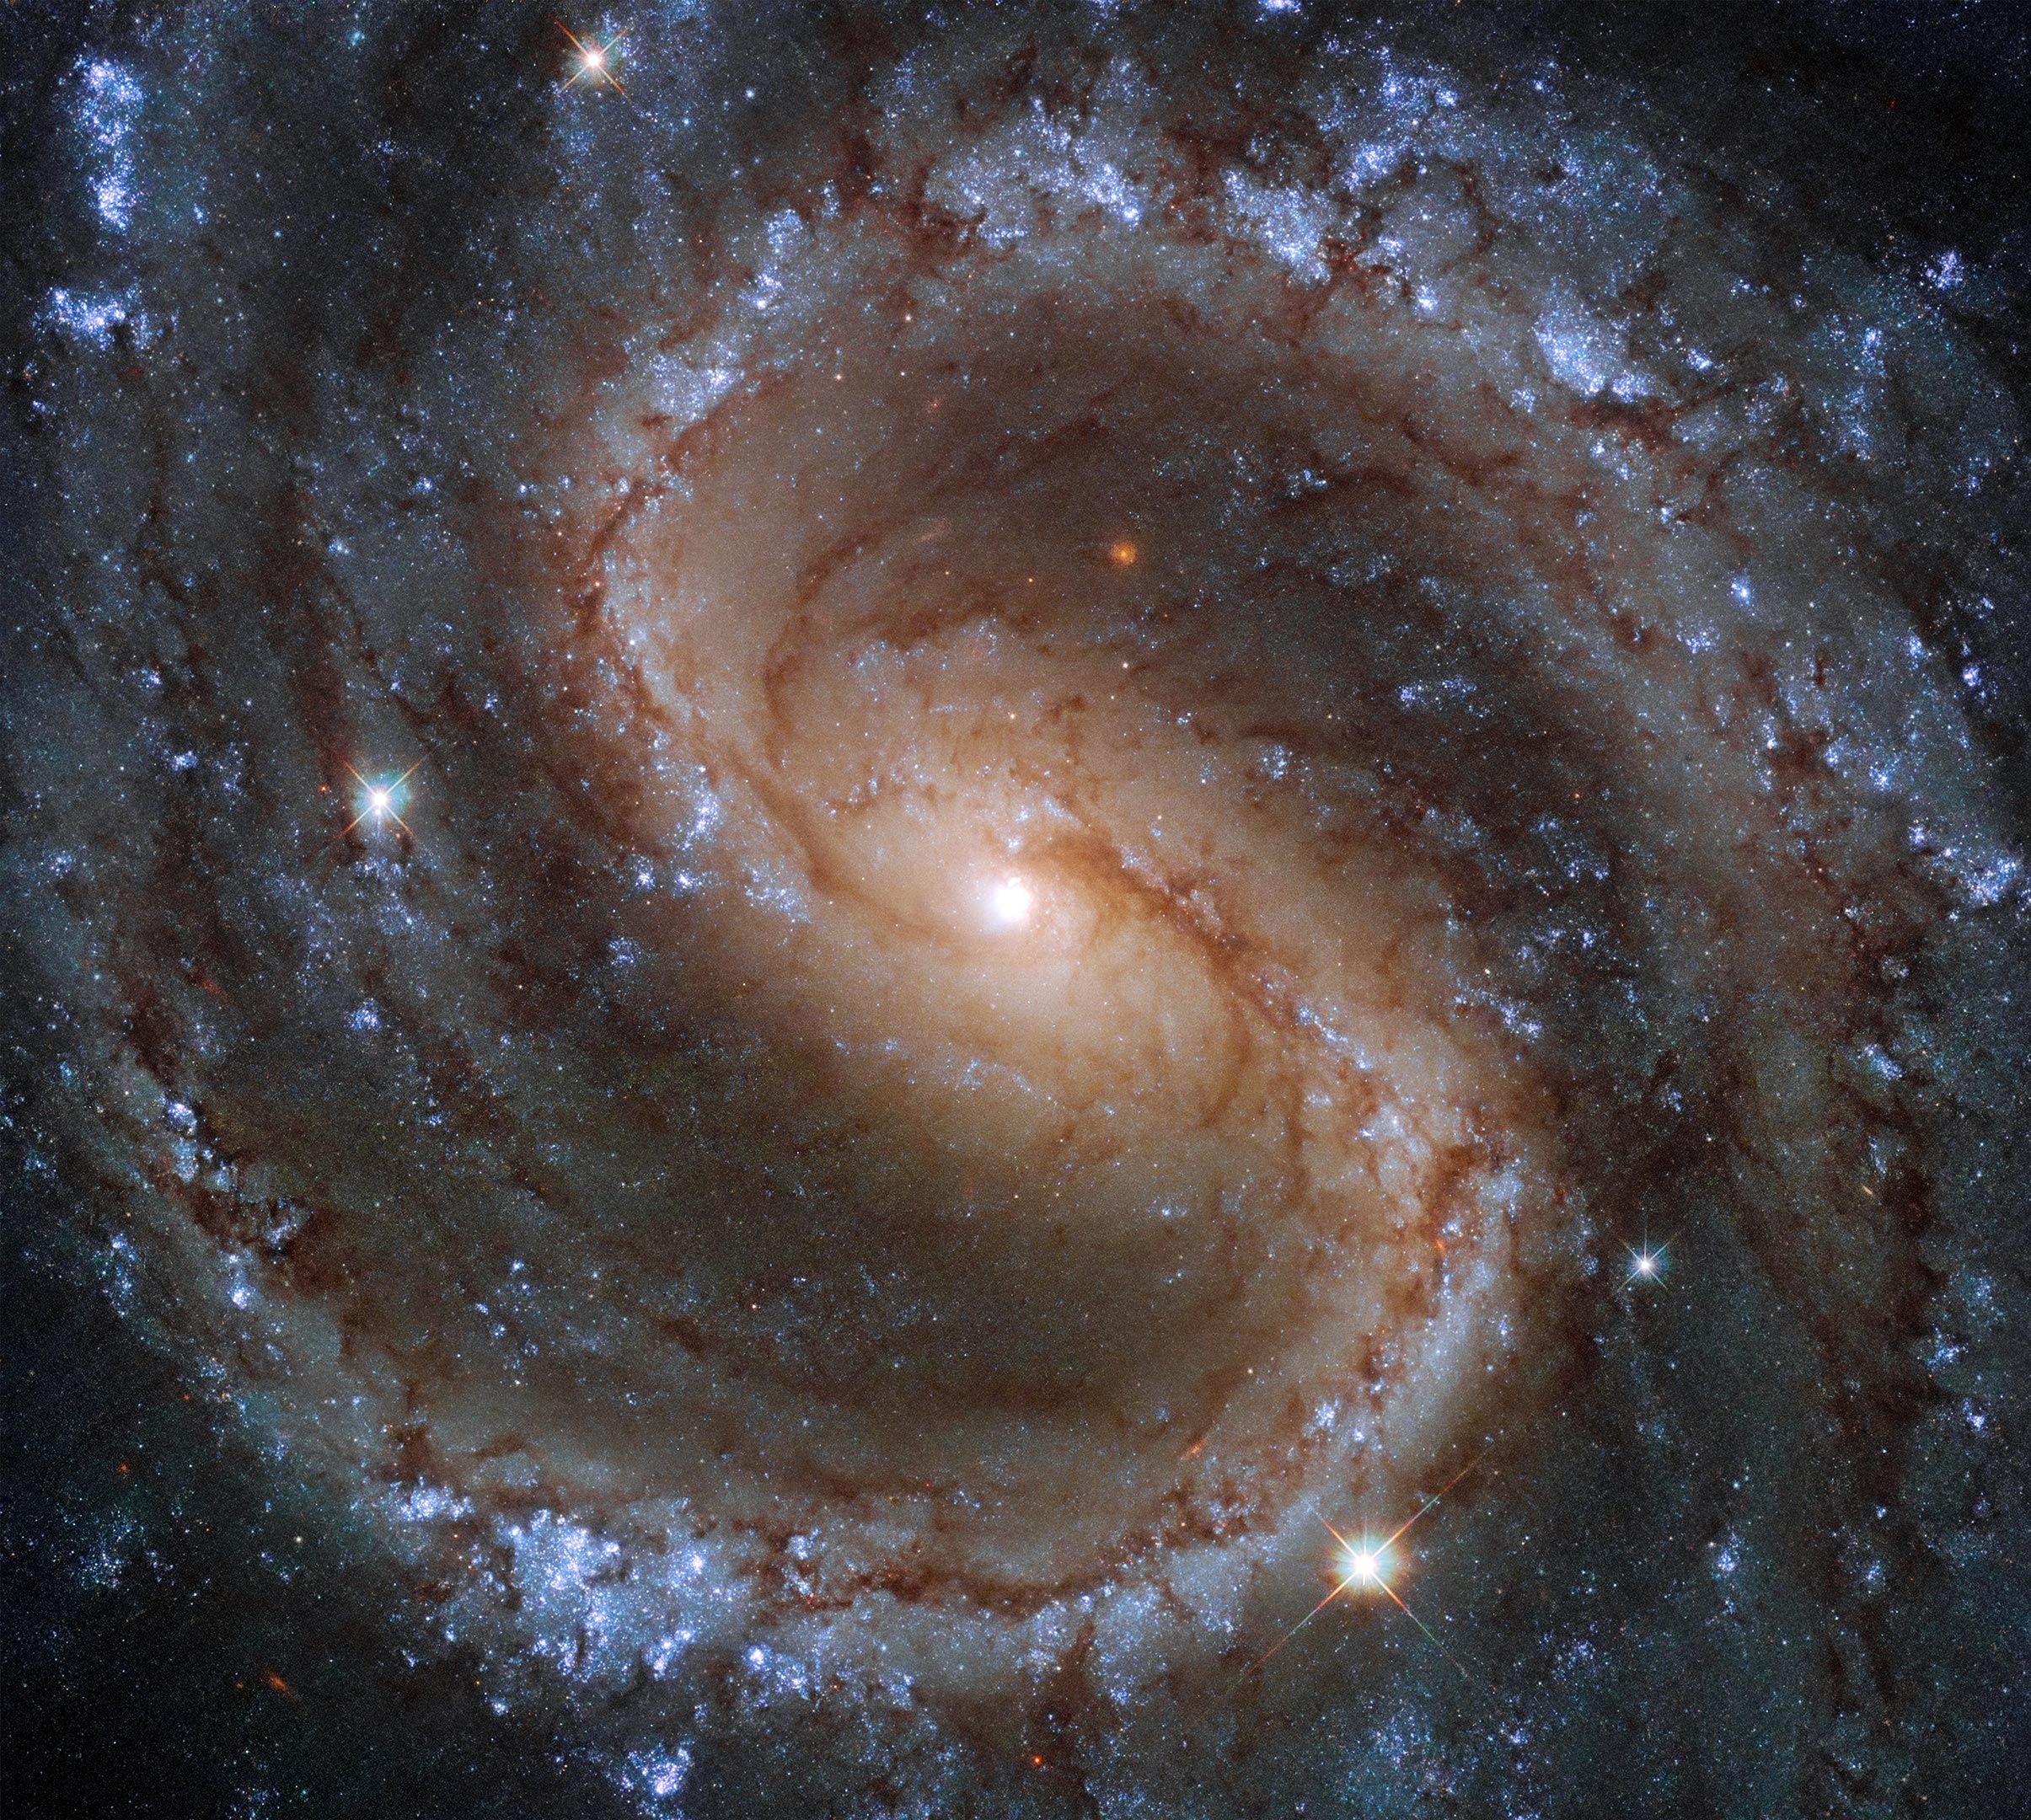 Hubble reveals the colors of the “Lost Galaxy” in extreme detail